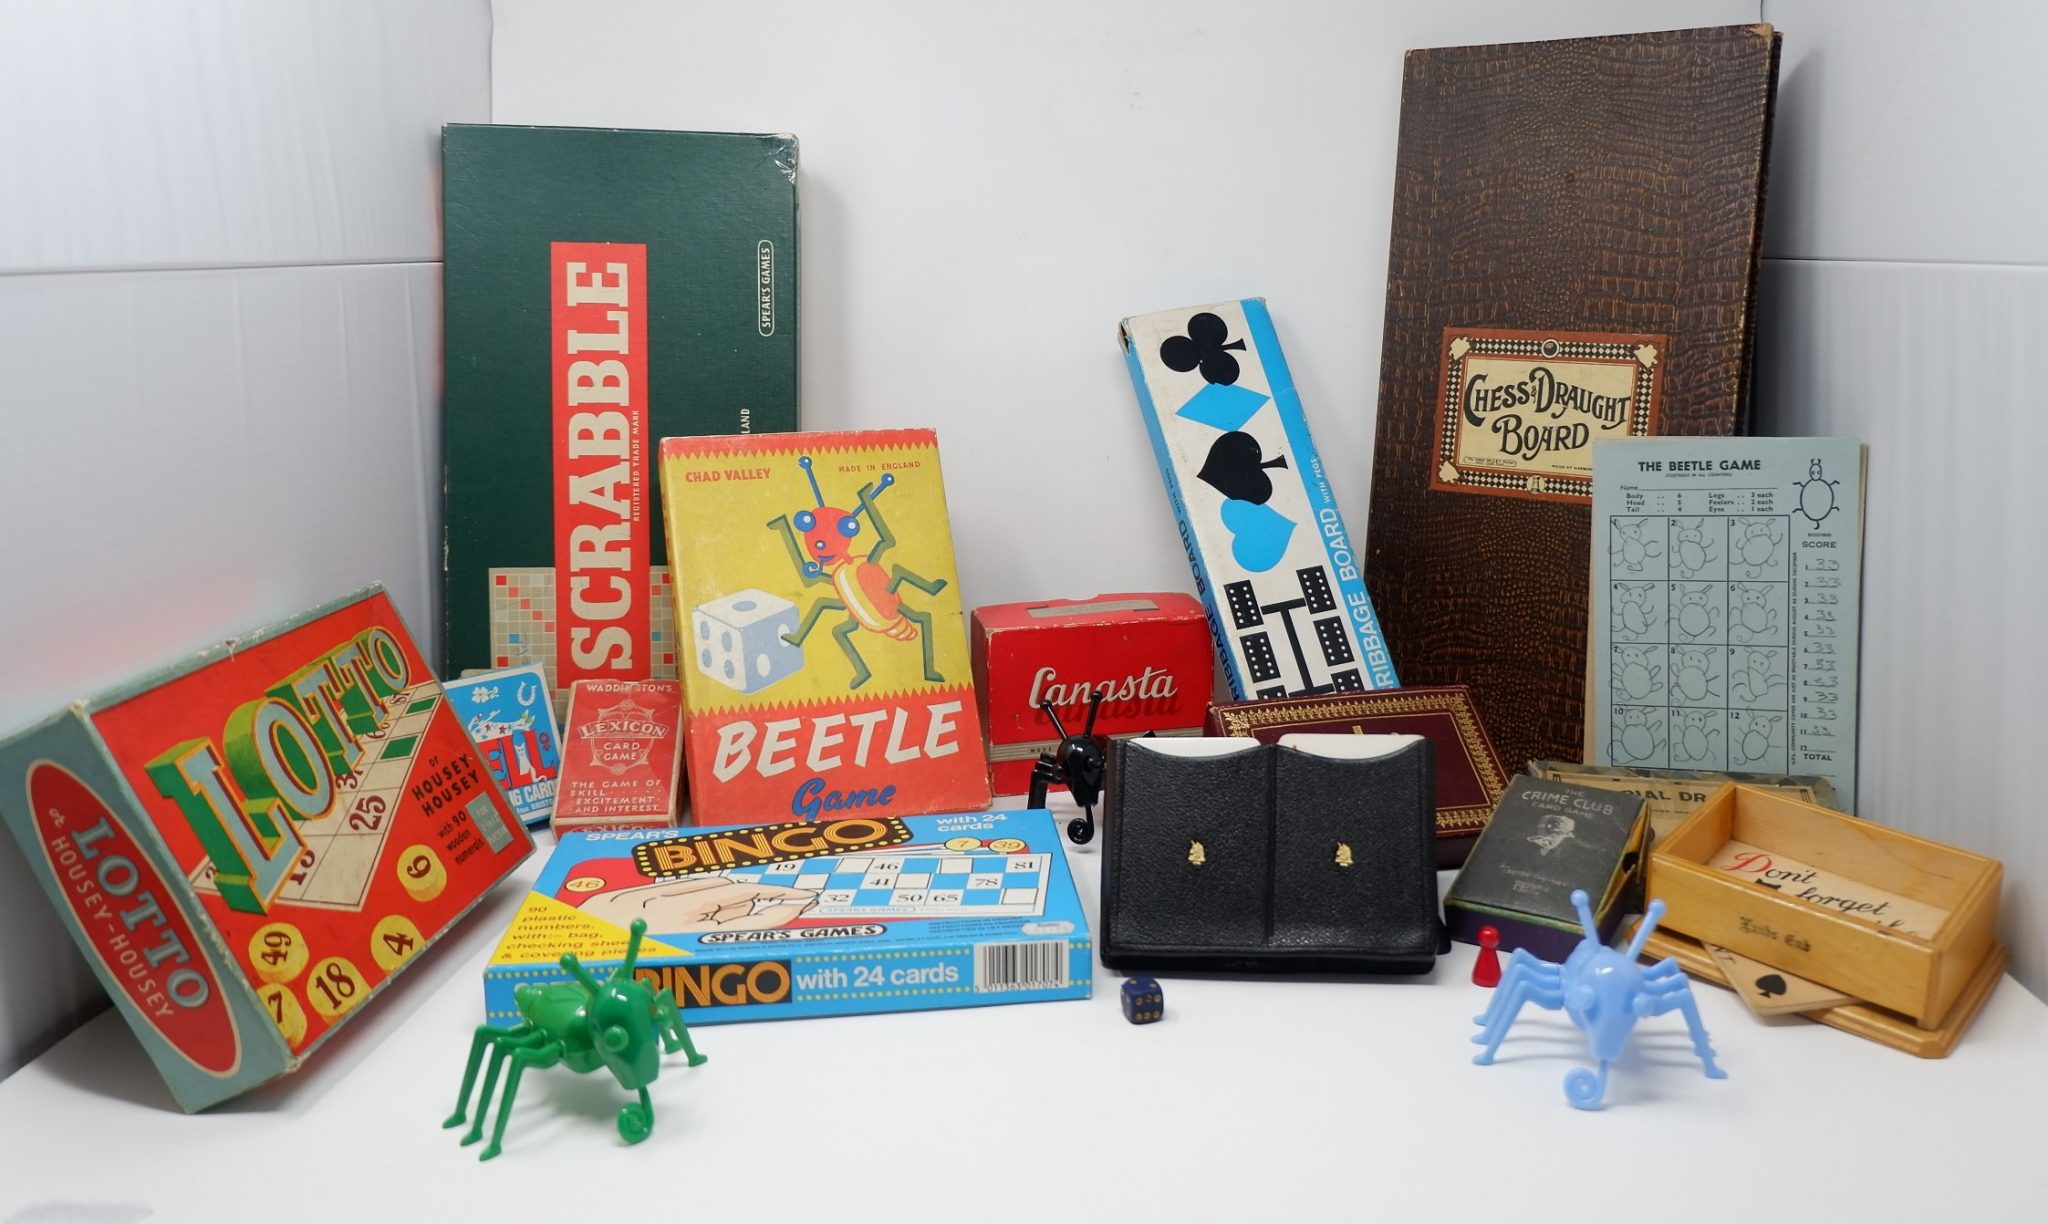 A collection of board games from the past. These include cards, scrabble, the beetle game, dominos and some card games.